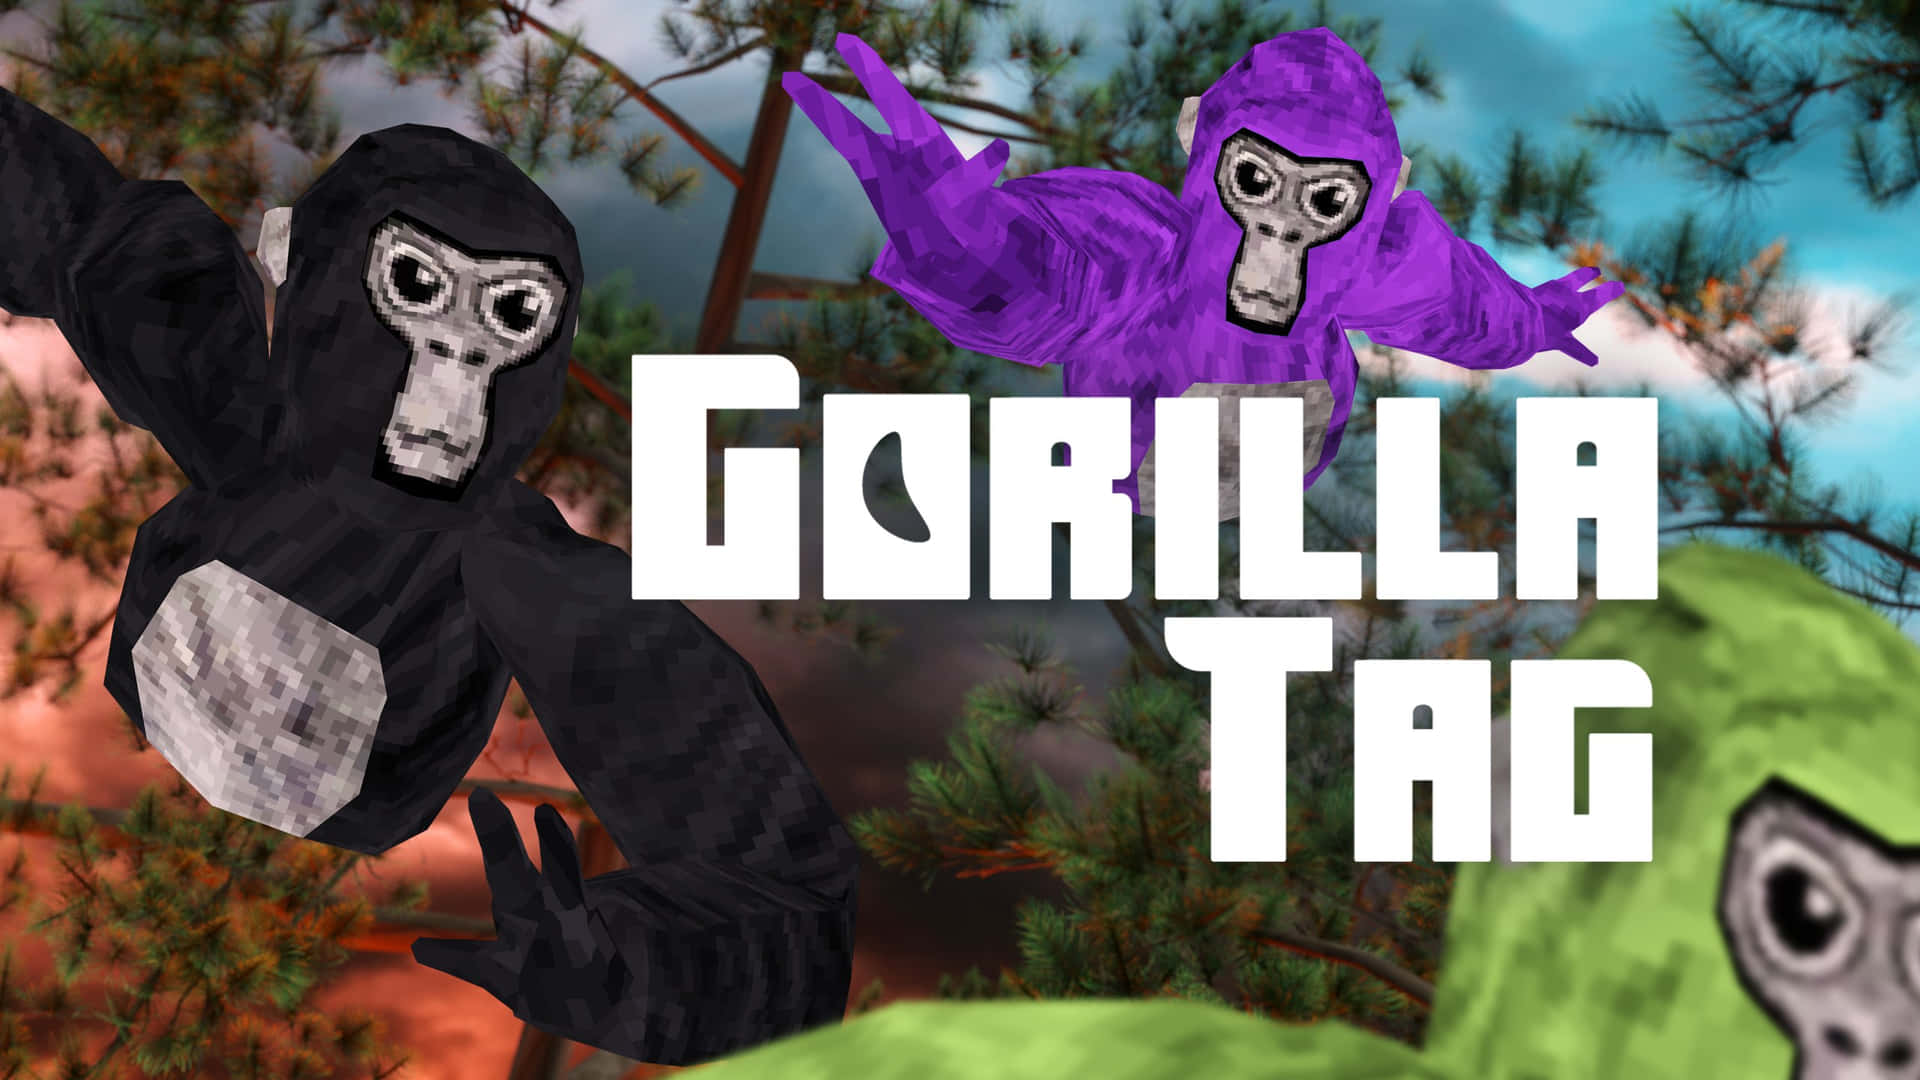 Bring Fun And Excitement To Any Environment With Gorilla Tag!